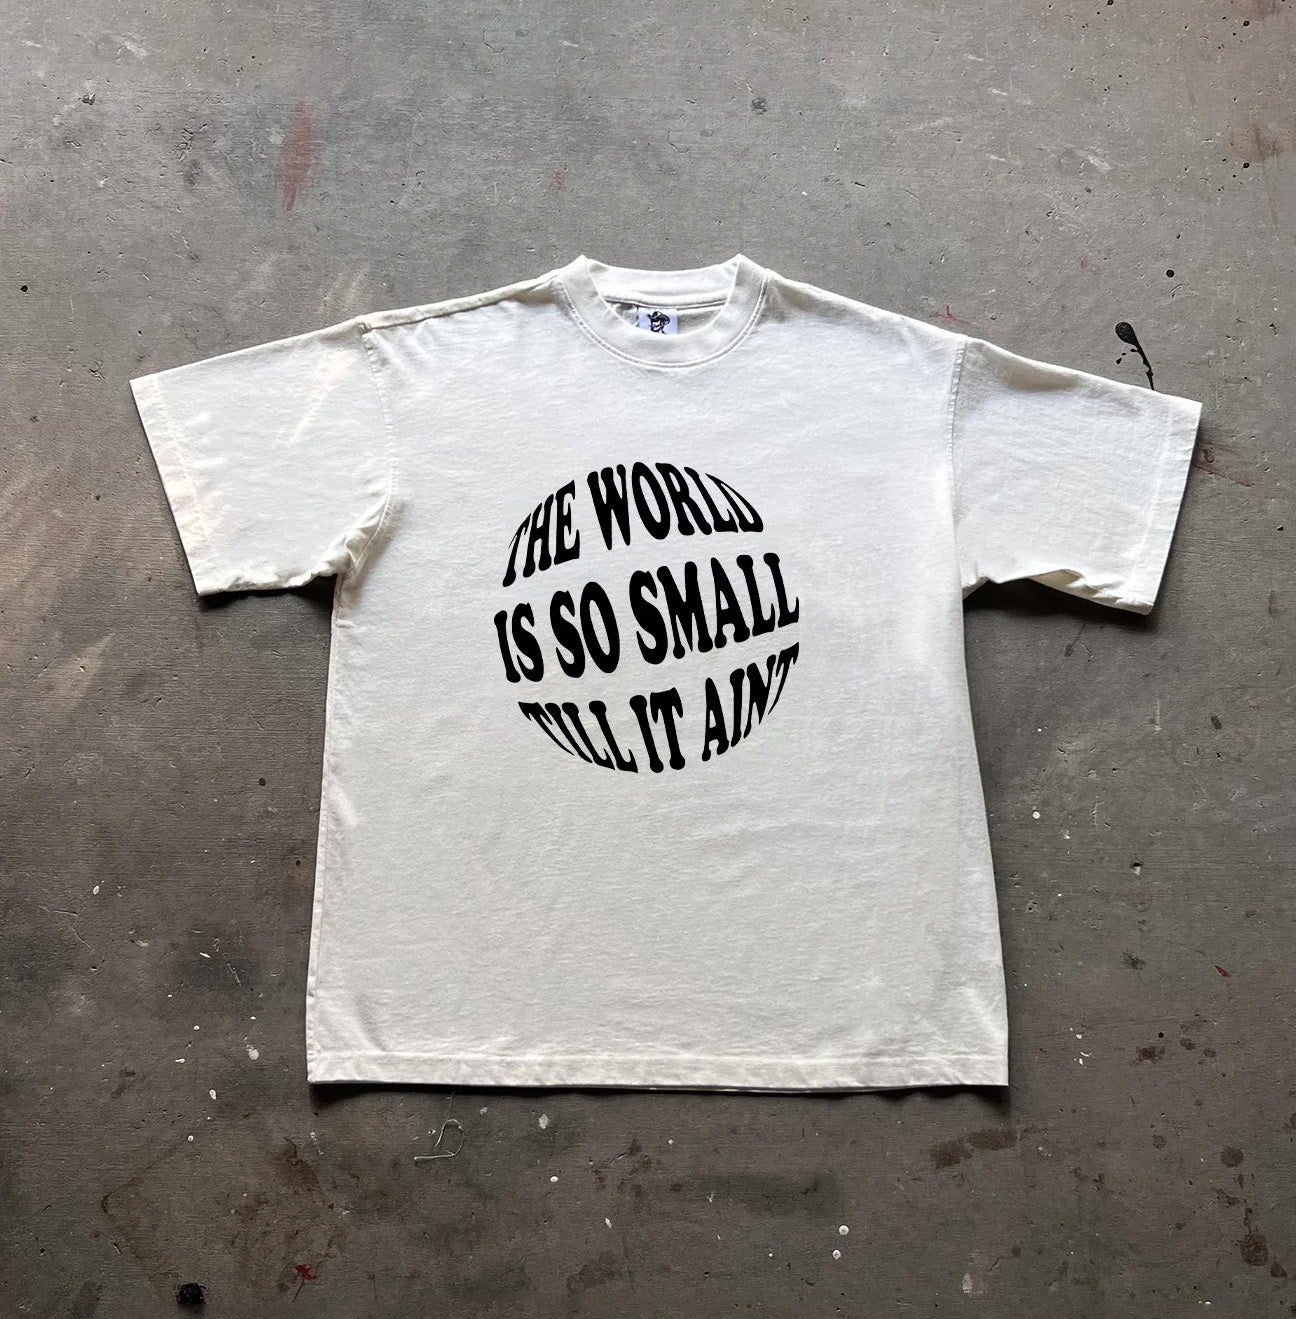 MAC MILLER "world is too small" Oversized T-shirt